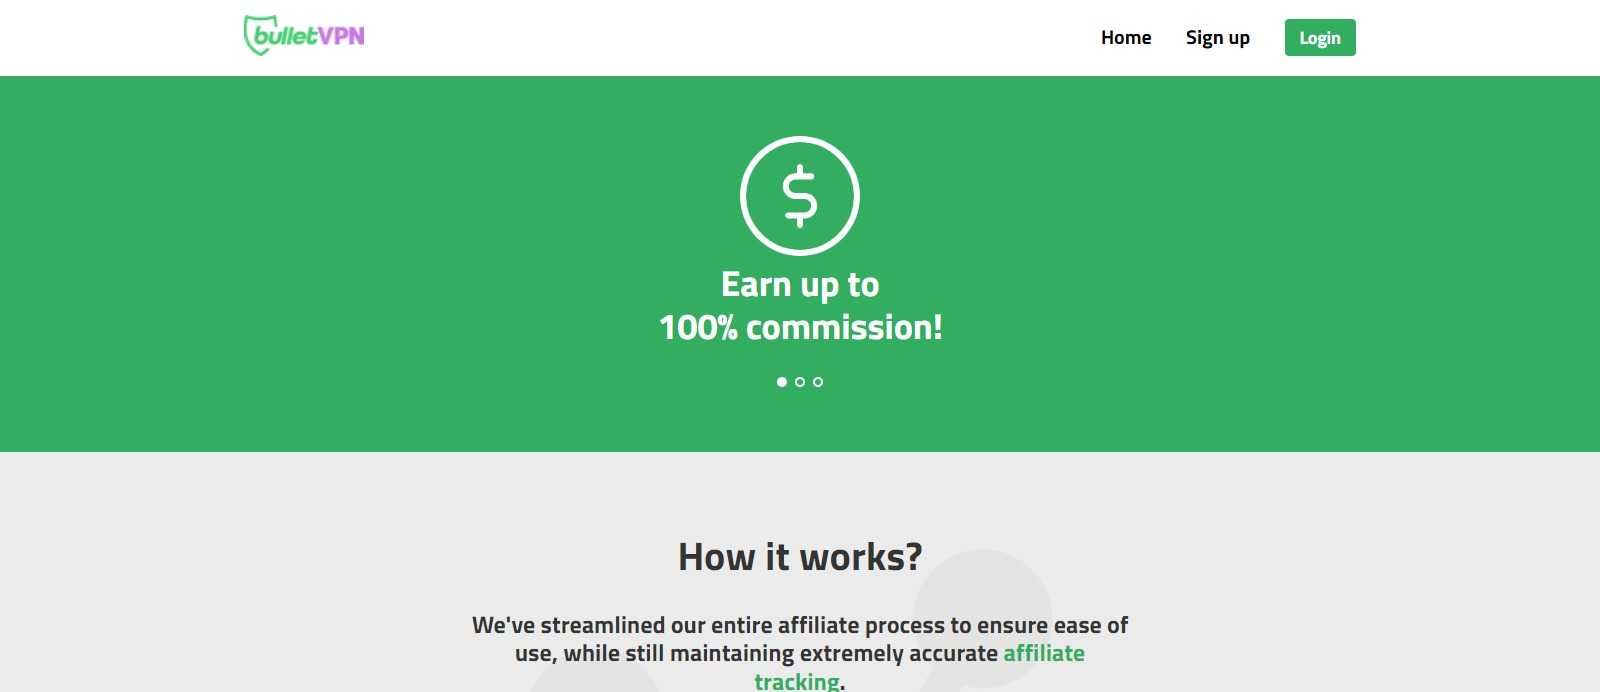 BulletVPN Affiliate Program Review: Up to 100% commission on Monthly